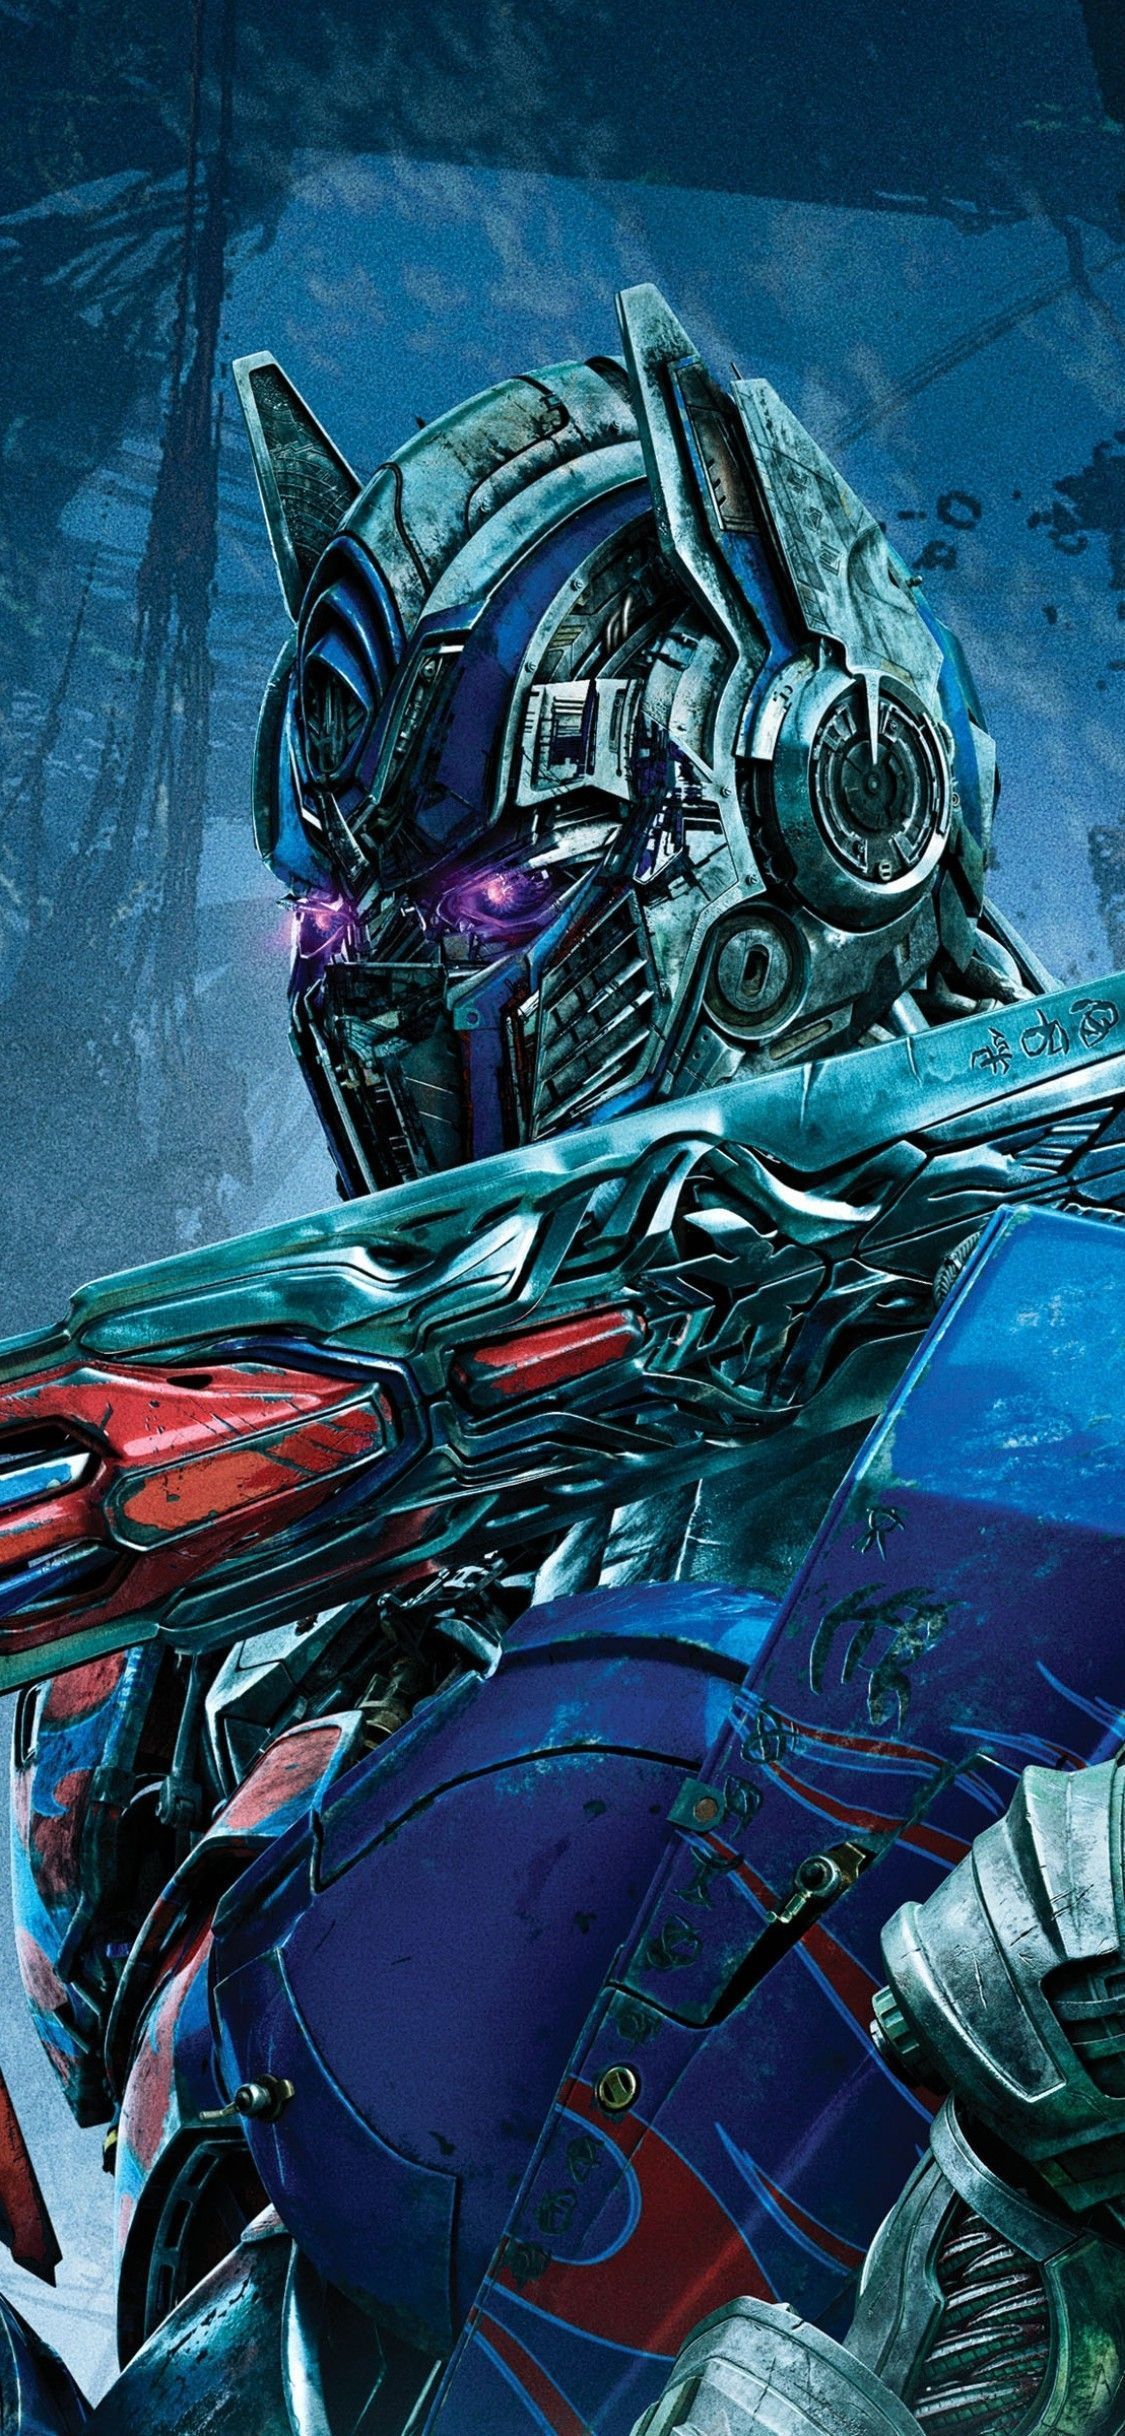 List of Best Hero Logo Wallpaper for Android Phone 2019 from wallpaperplay.c. Optimus prime wallpaper transformers, Optimus prime wallpaper, Transformers optimus